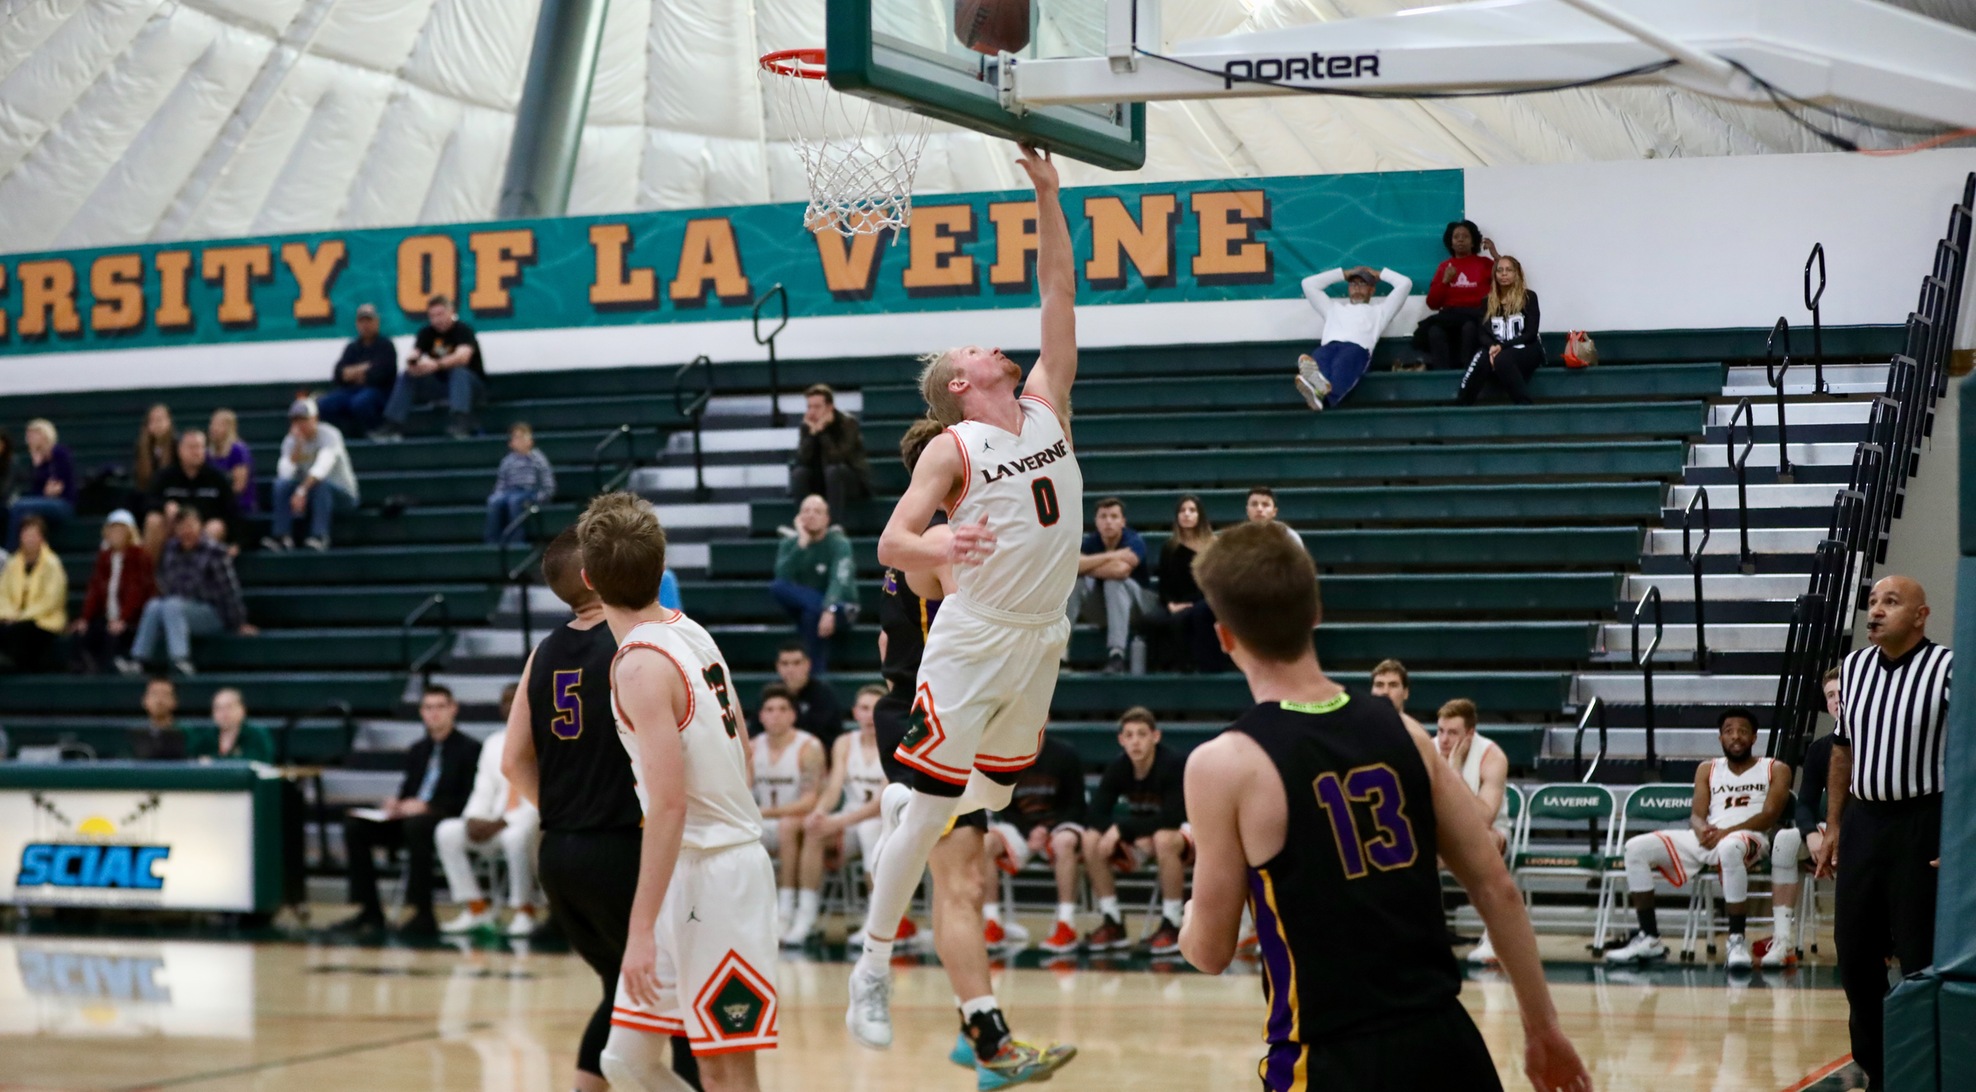 Leopards drop non-conference game to UCSC